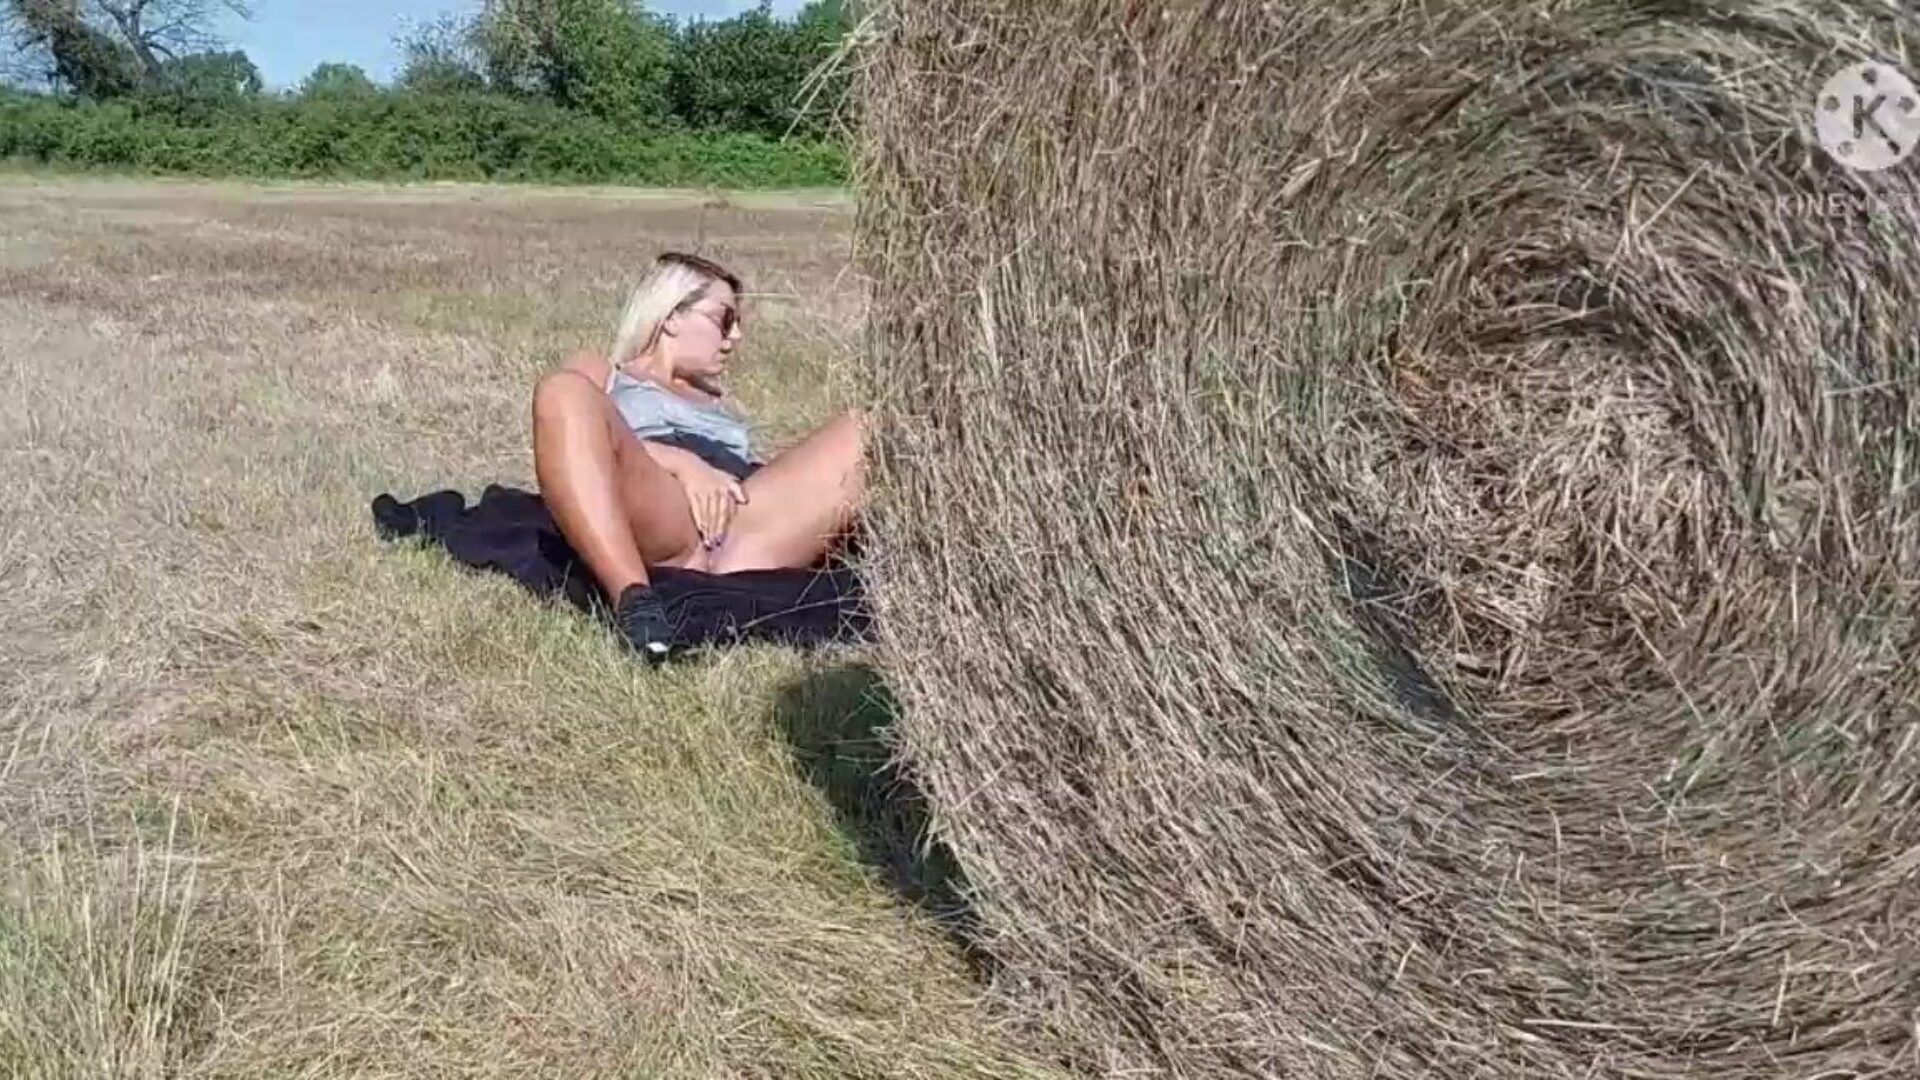 The public agent Lucie is screwed by a stranger in the nature by the roadside !!! What a doxy !!